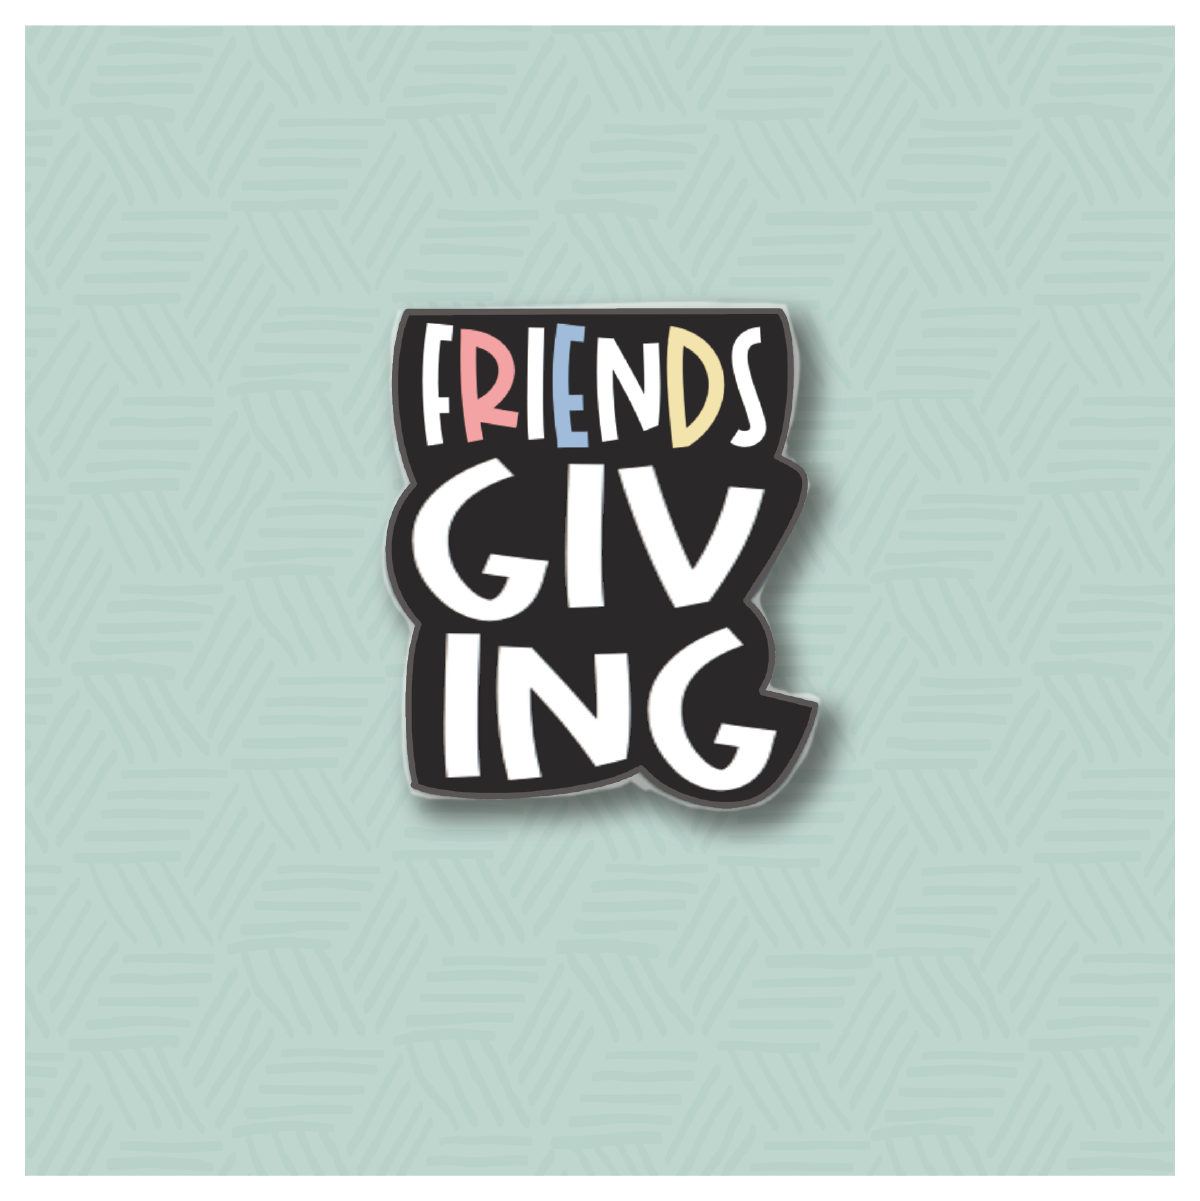 Chubby Hand Lettered Friendsgiving Cookie Cutter